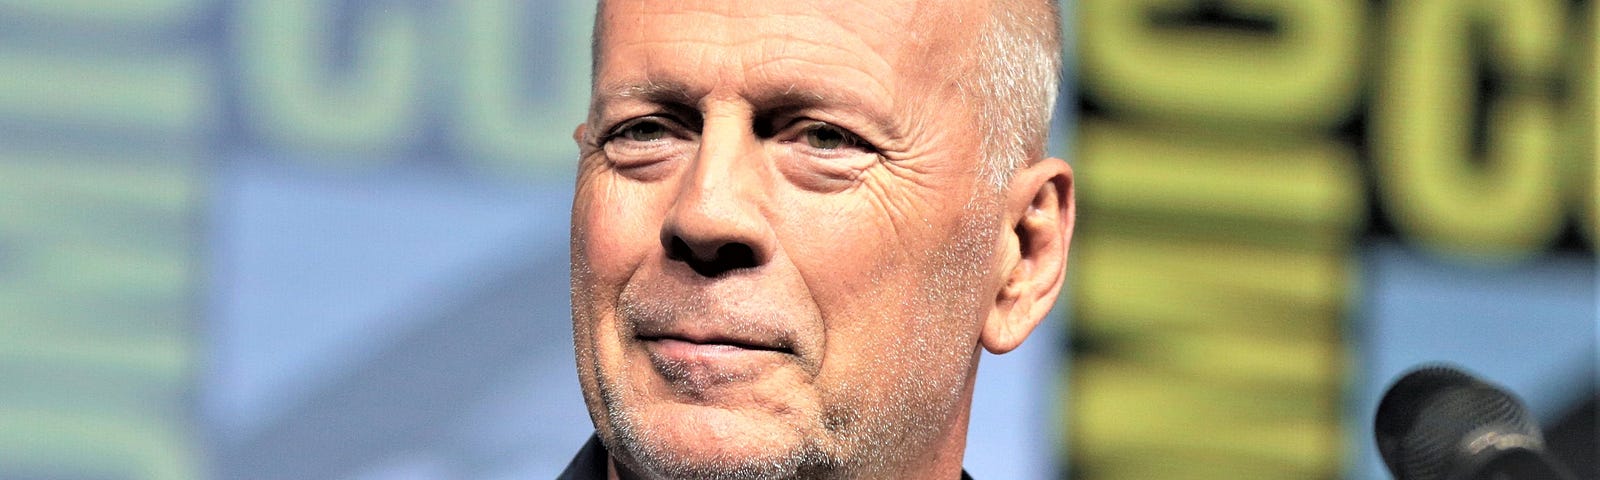 The Frontotemporal Dementia Diagnosis of Bruce Willis